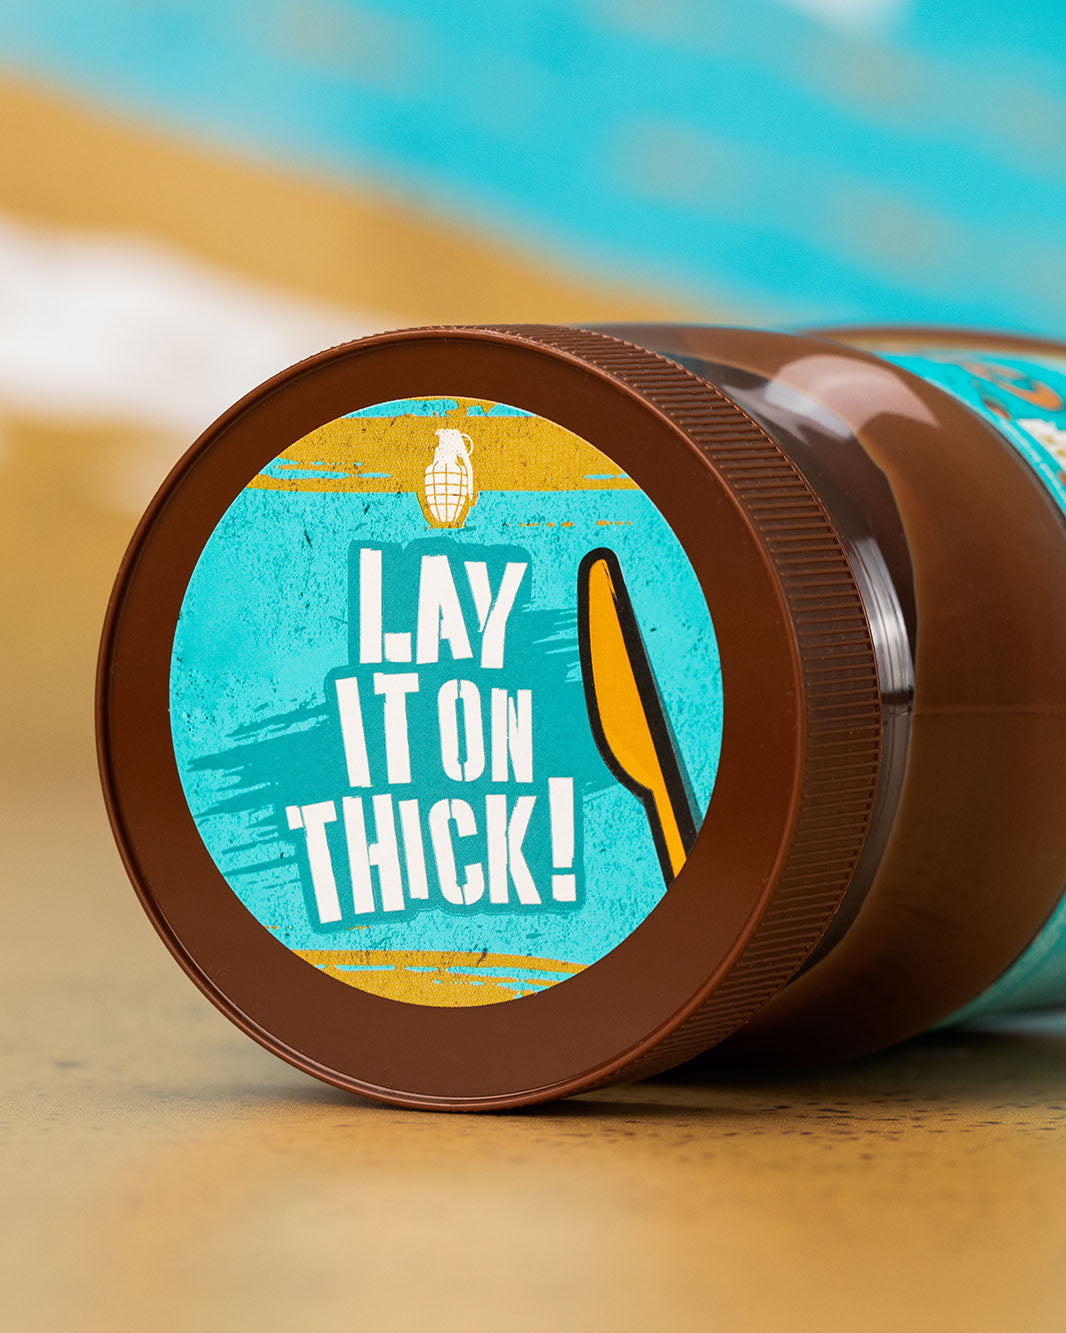 Lay it on thick protein spread lid